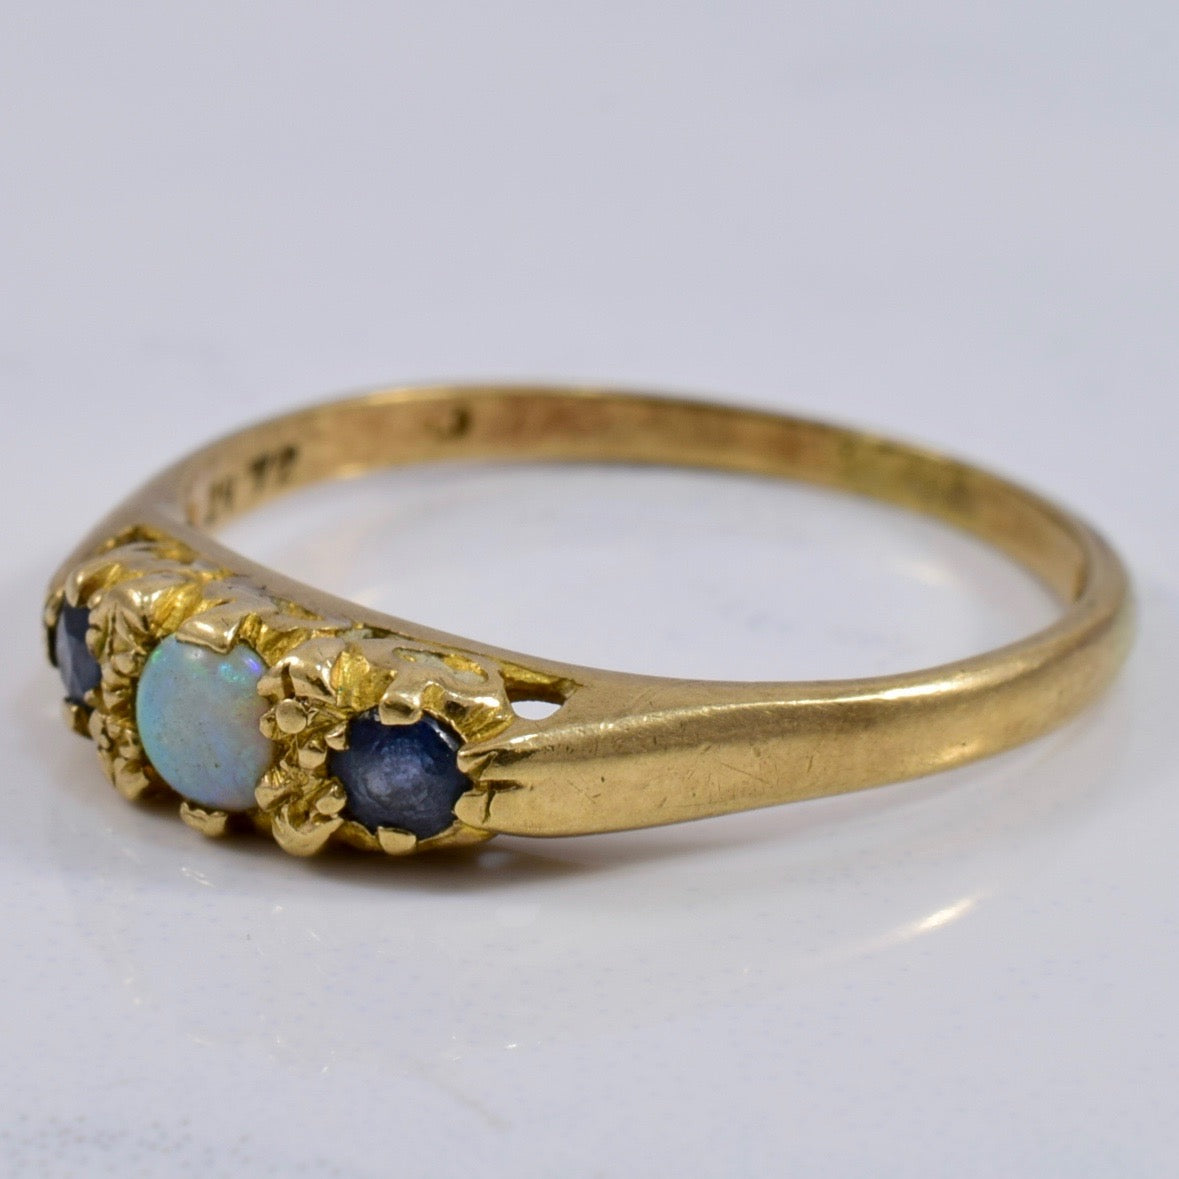 Early Victorian Era Opal and Sapphire Ring | 0.23 ctw SZ 7.75 |